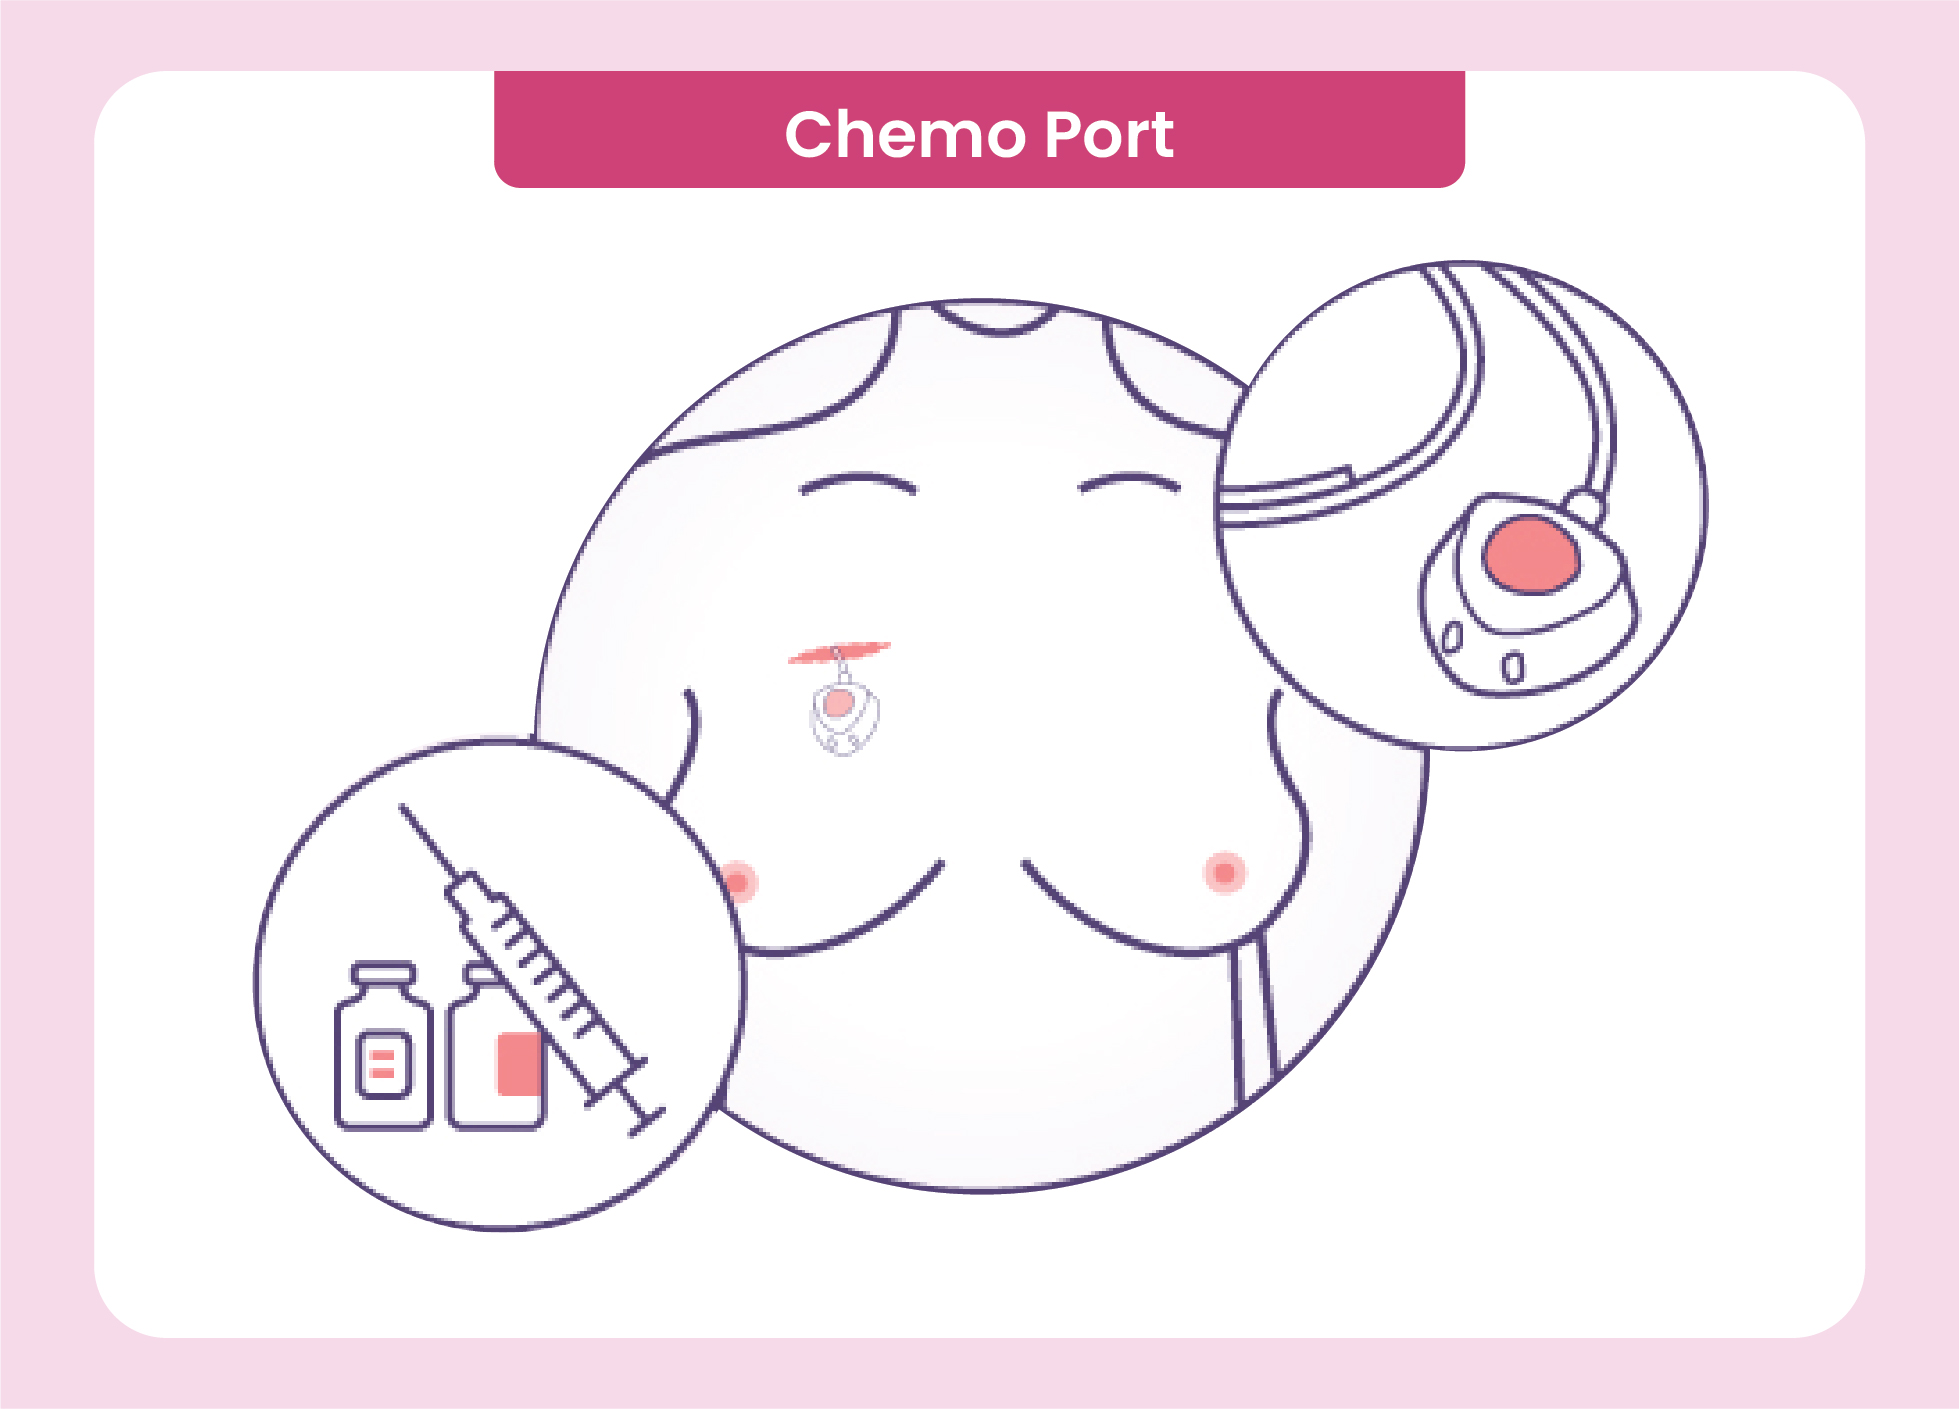 Chemo Port Device - Easy Access for Chemotherapy